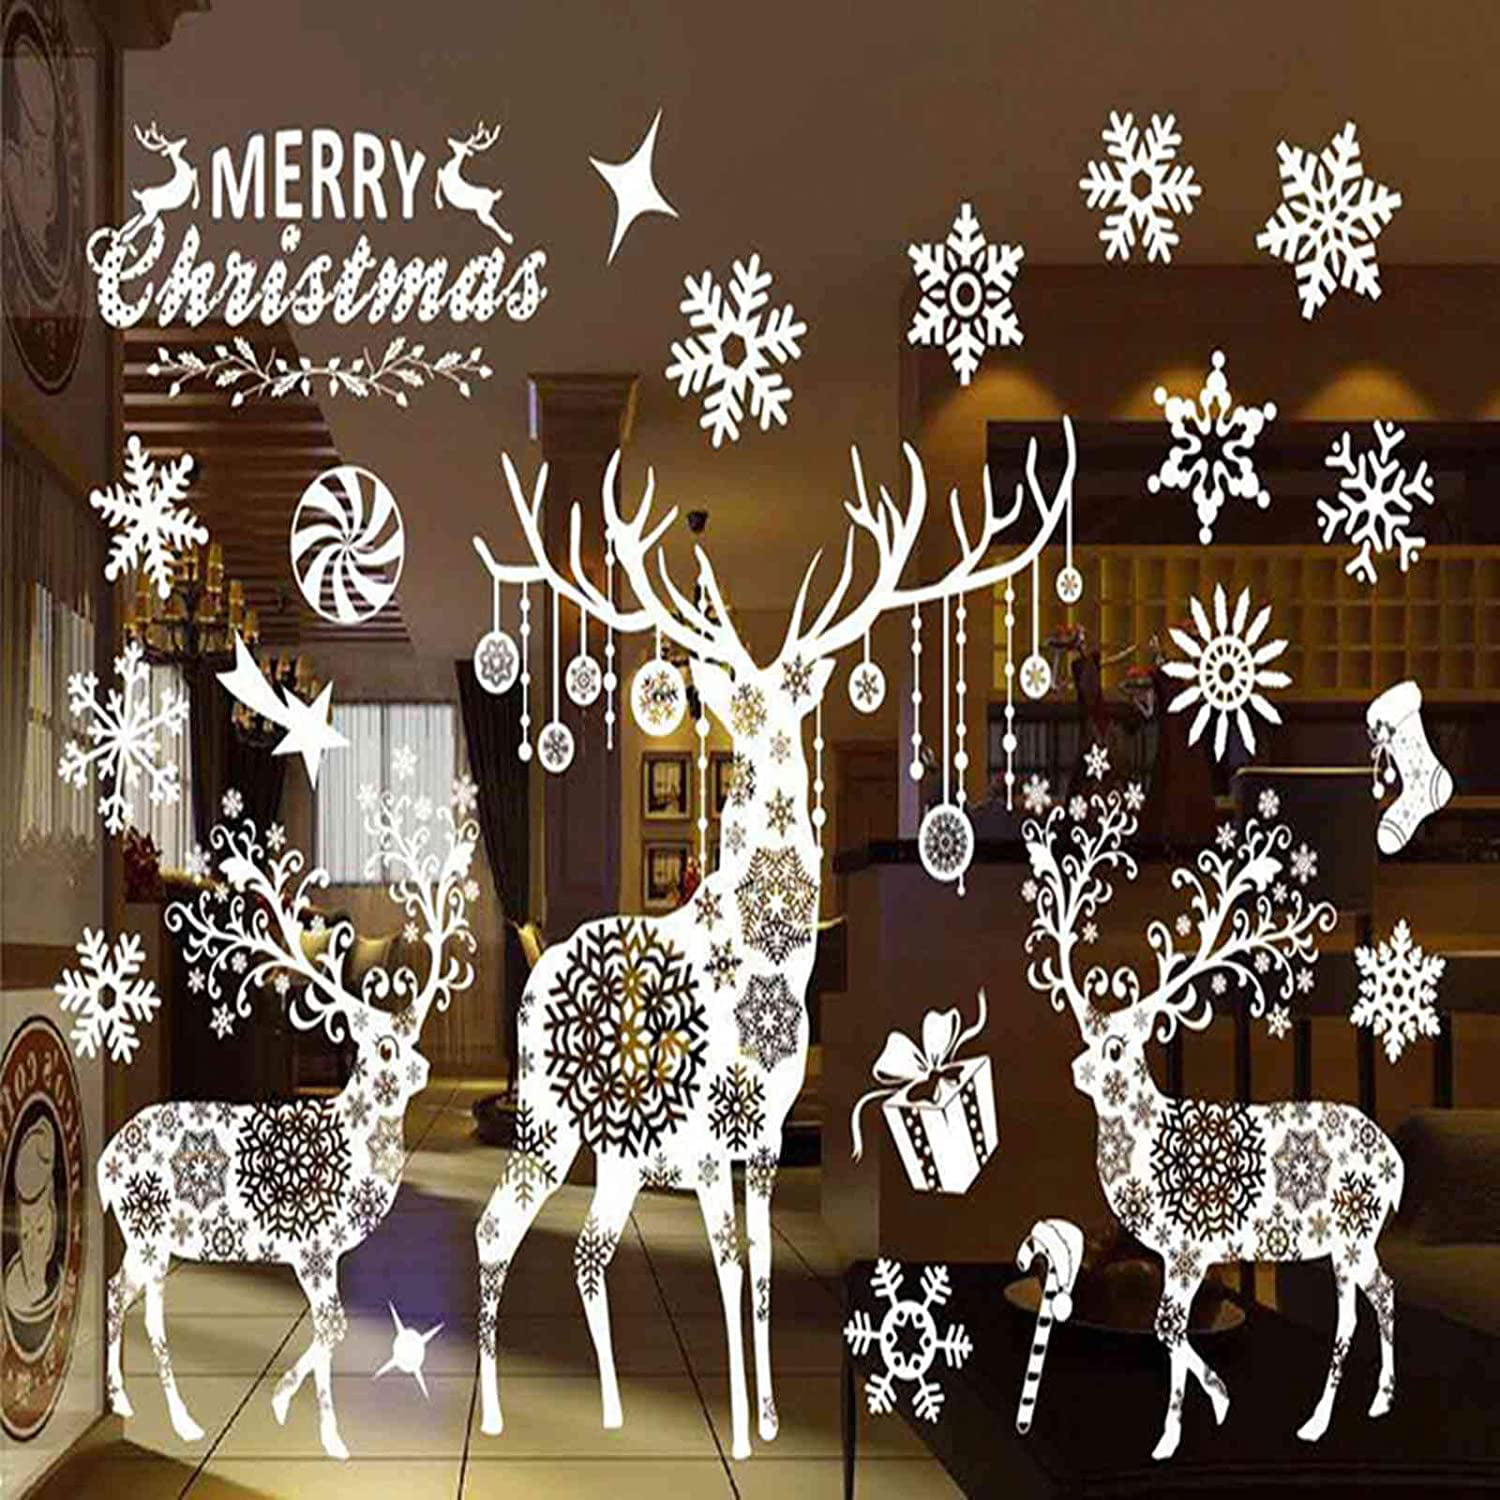 Merry Christmas Window Stickers Clings Snowflake Art Decal Xmas Home Decor 